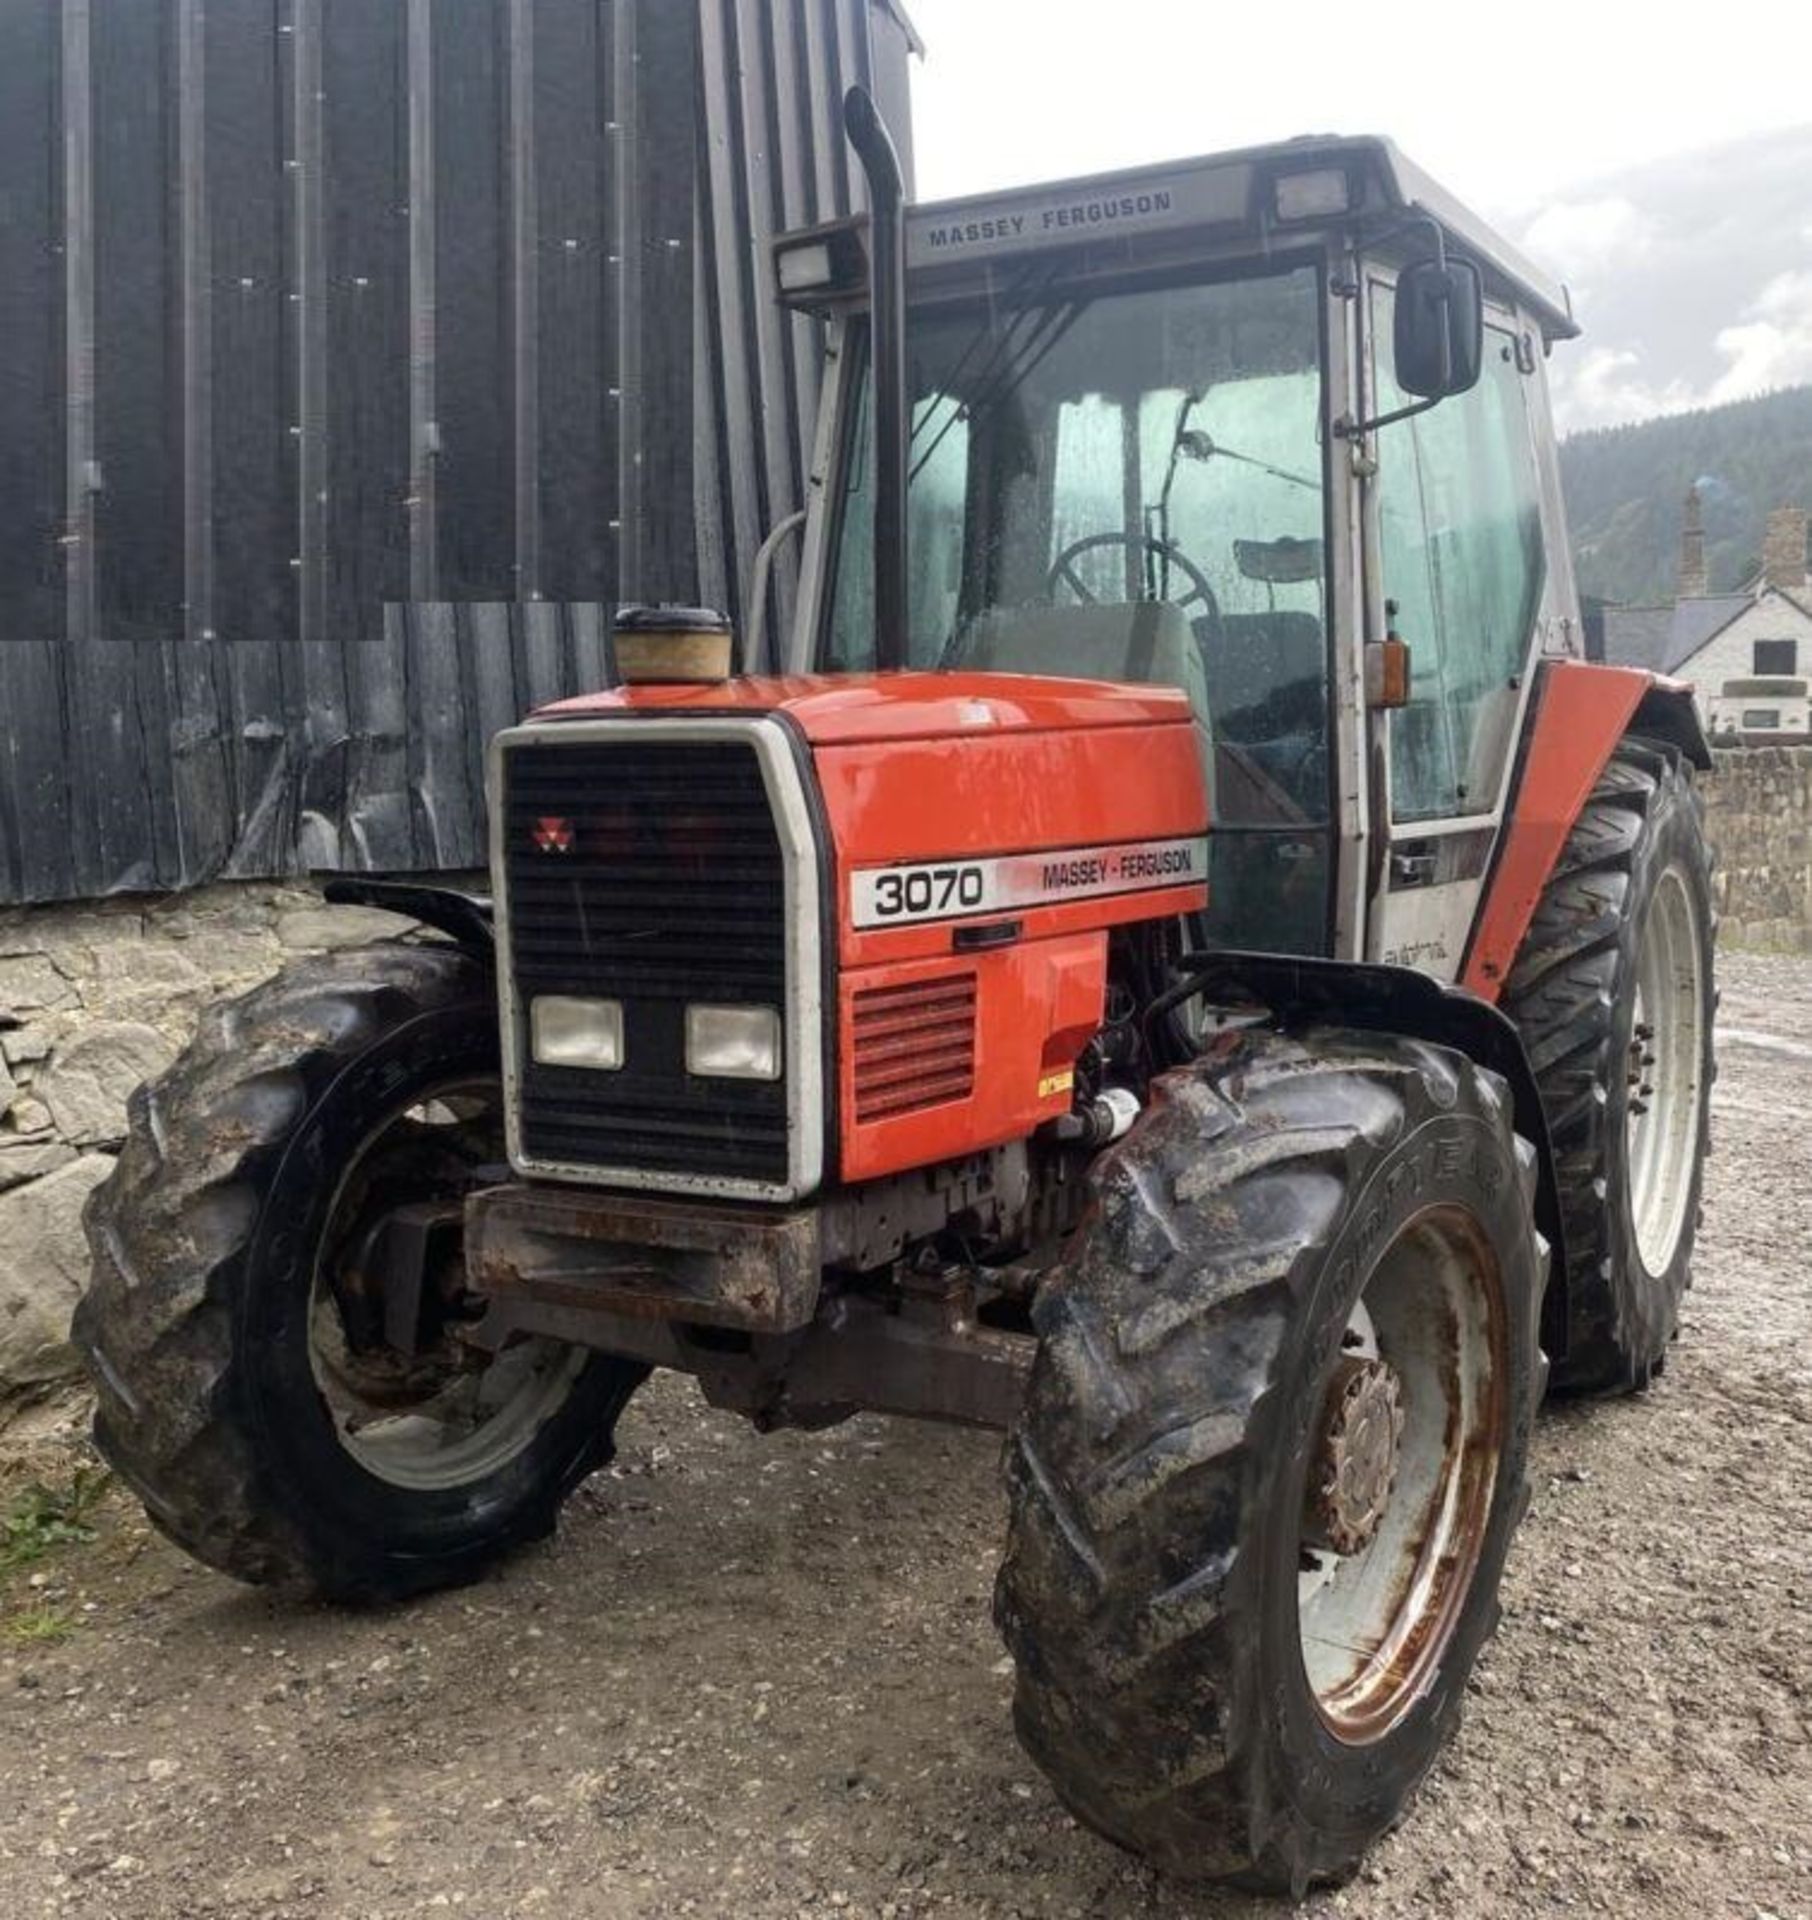 MASSEY FERGUSON 3070 TURBO 4WD AUTOTRONIC FARM TRACTOR - MECHANICALLY PERFECT, READY FOR DUTY! - Image 2 of 11